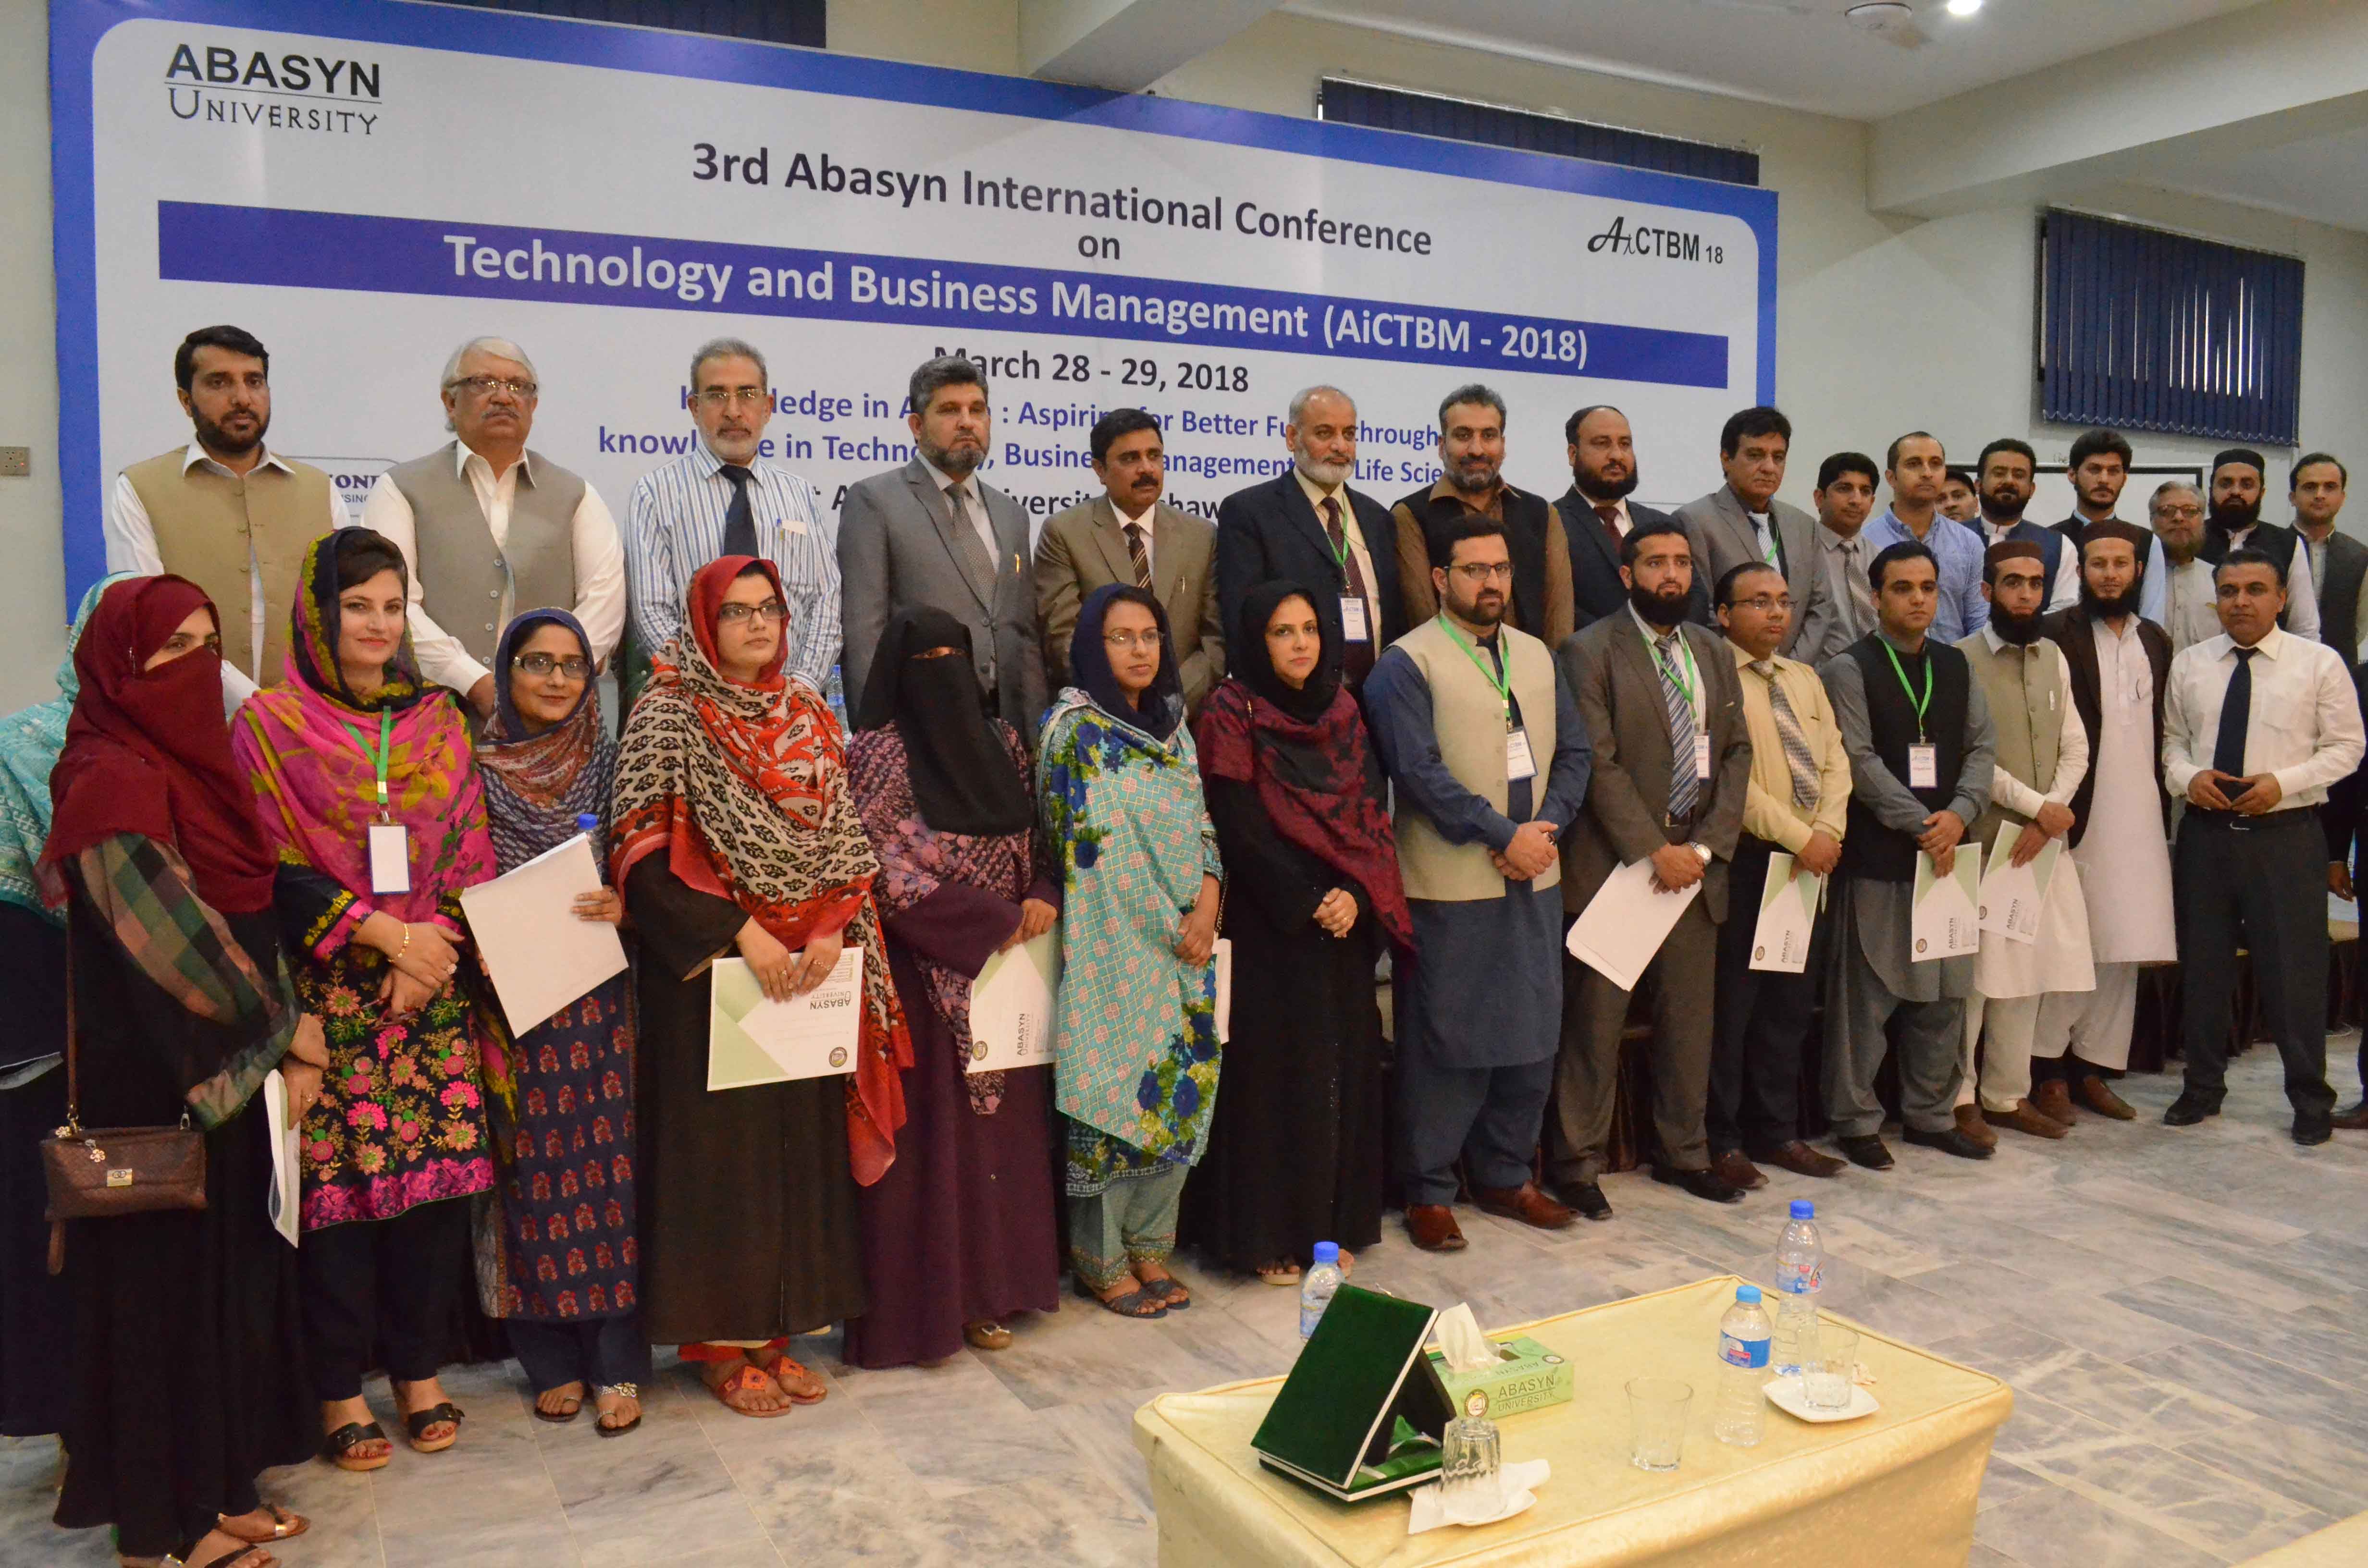 Group photo of HODs of different departments, faculty members and organisers with Chancellor and Vice Chancellor Abasyn university at the AICTBM Conference 